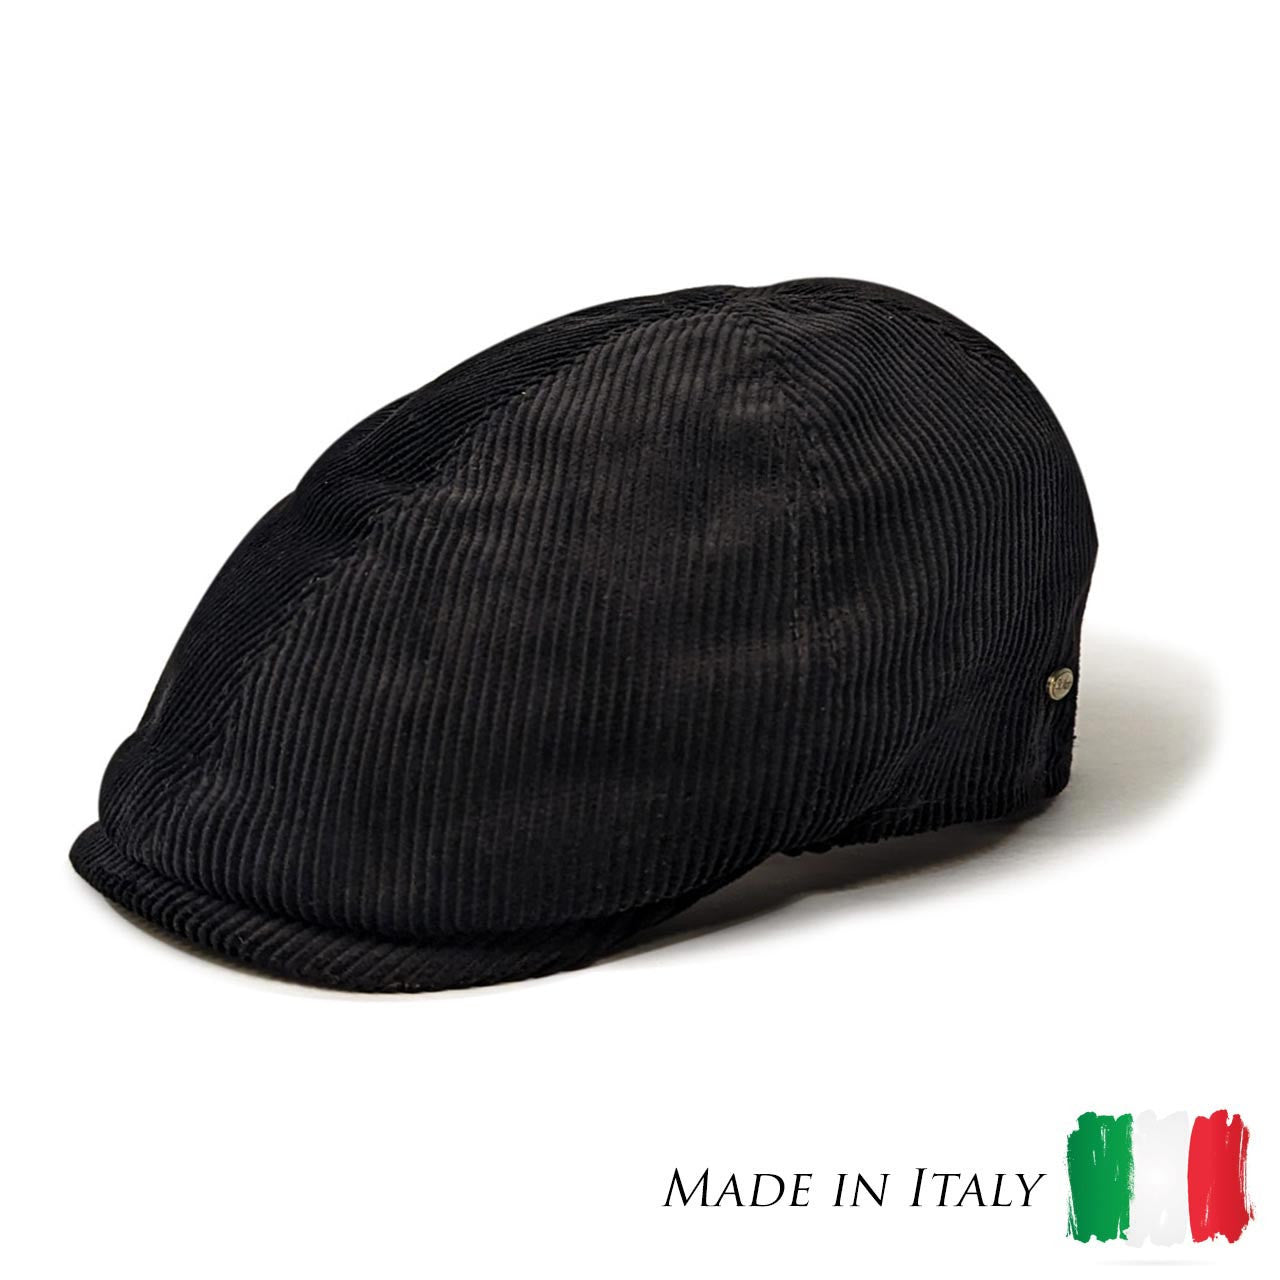 Saint Martin - Corduroy Driving Cap - style made in Italy